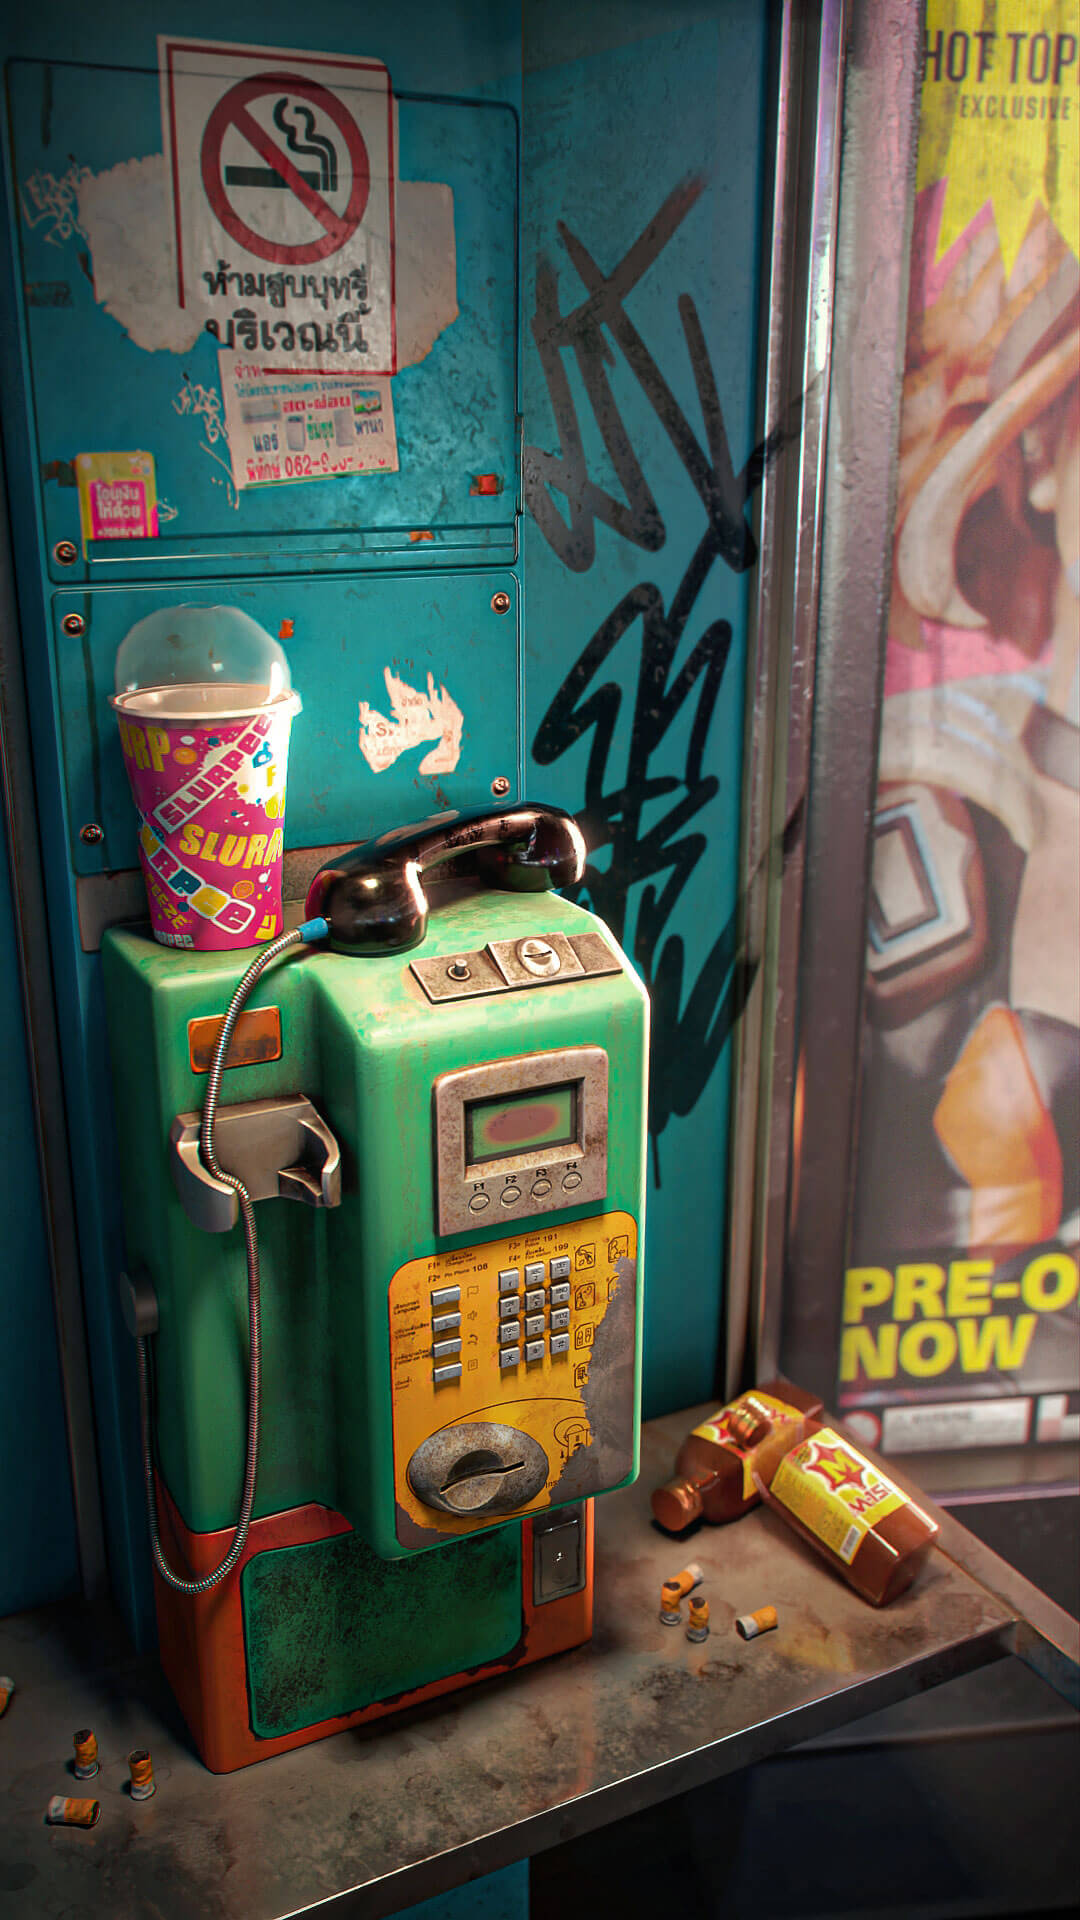 A dirty payphone surrounded by trash and advertisements.